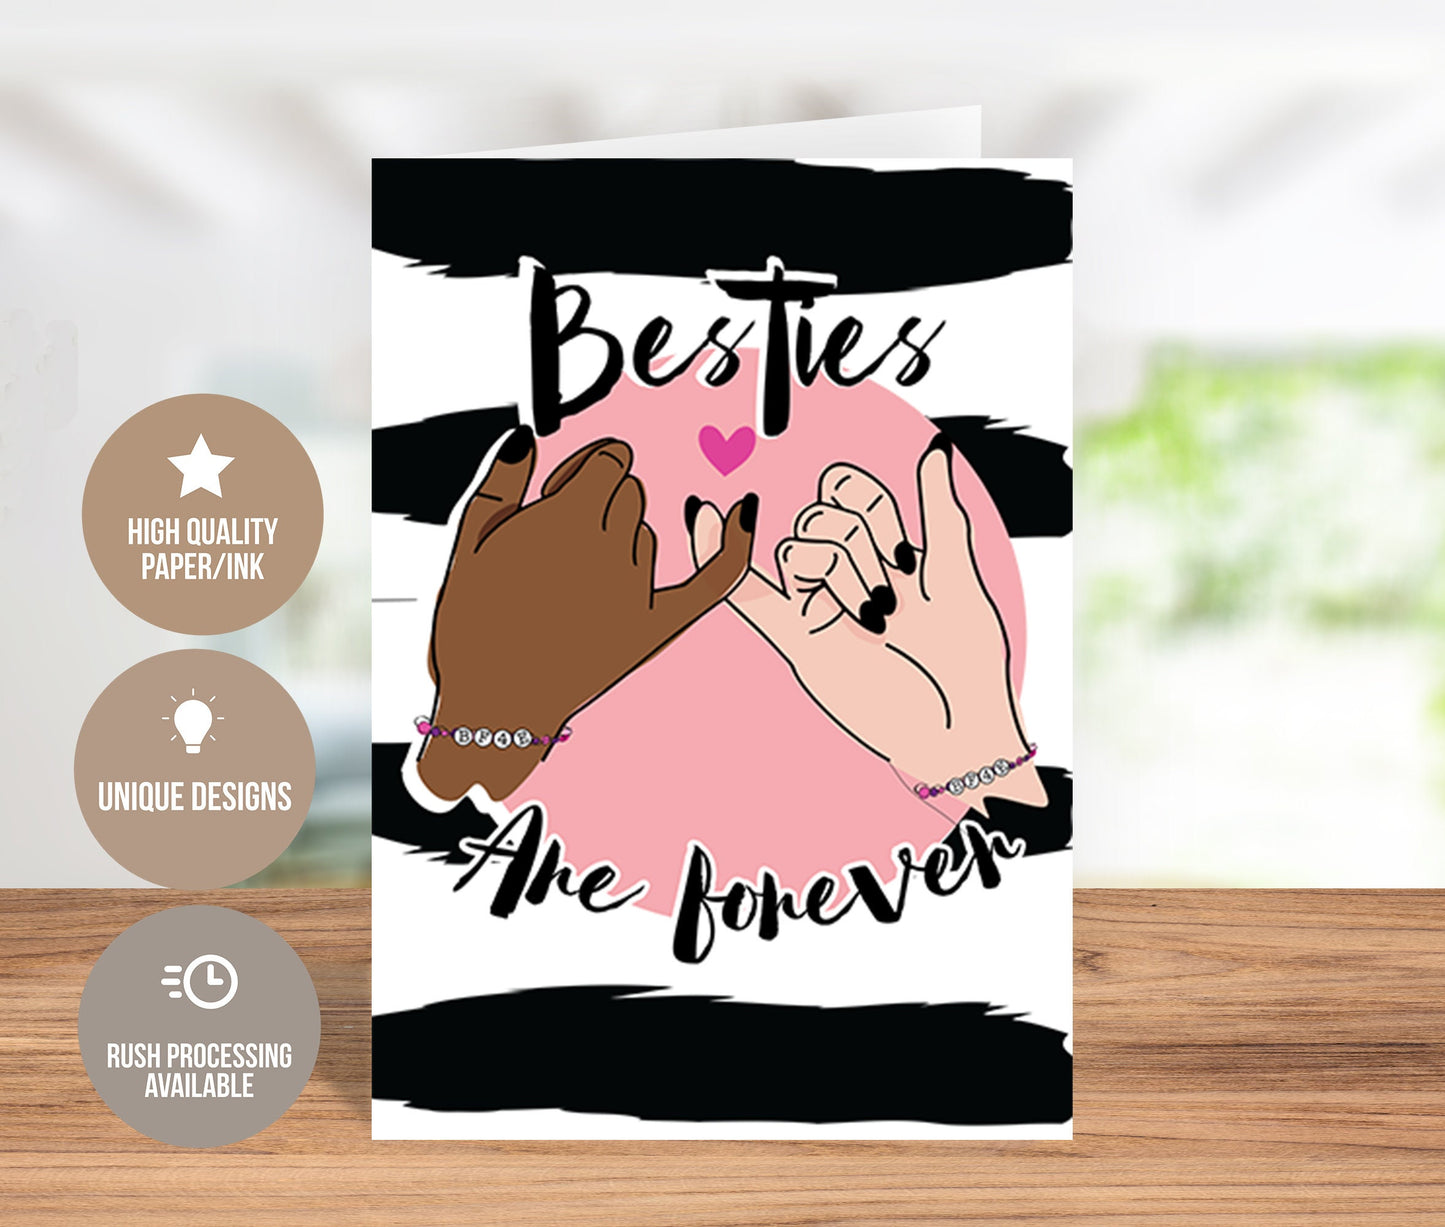 Besties Are Forever Greeting Card for Valentine's or Galentine's Day Celebration